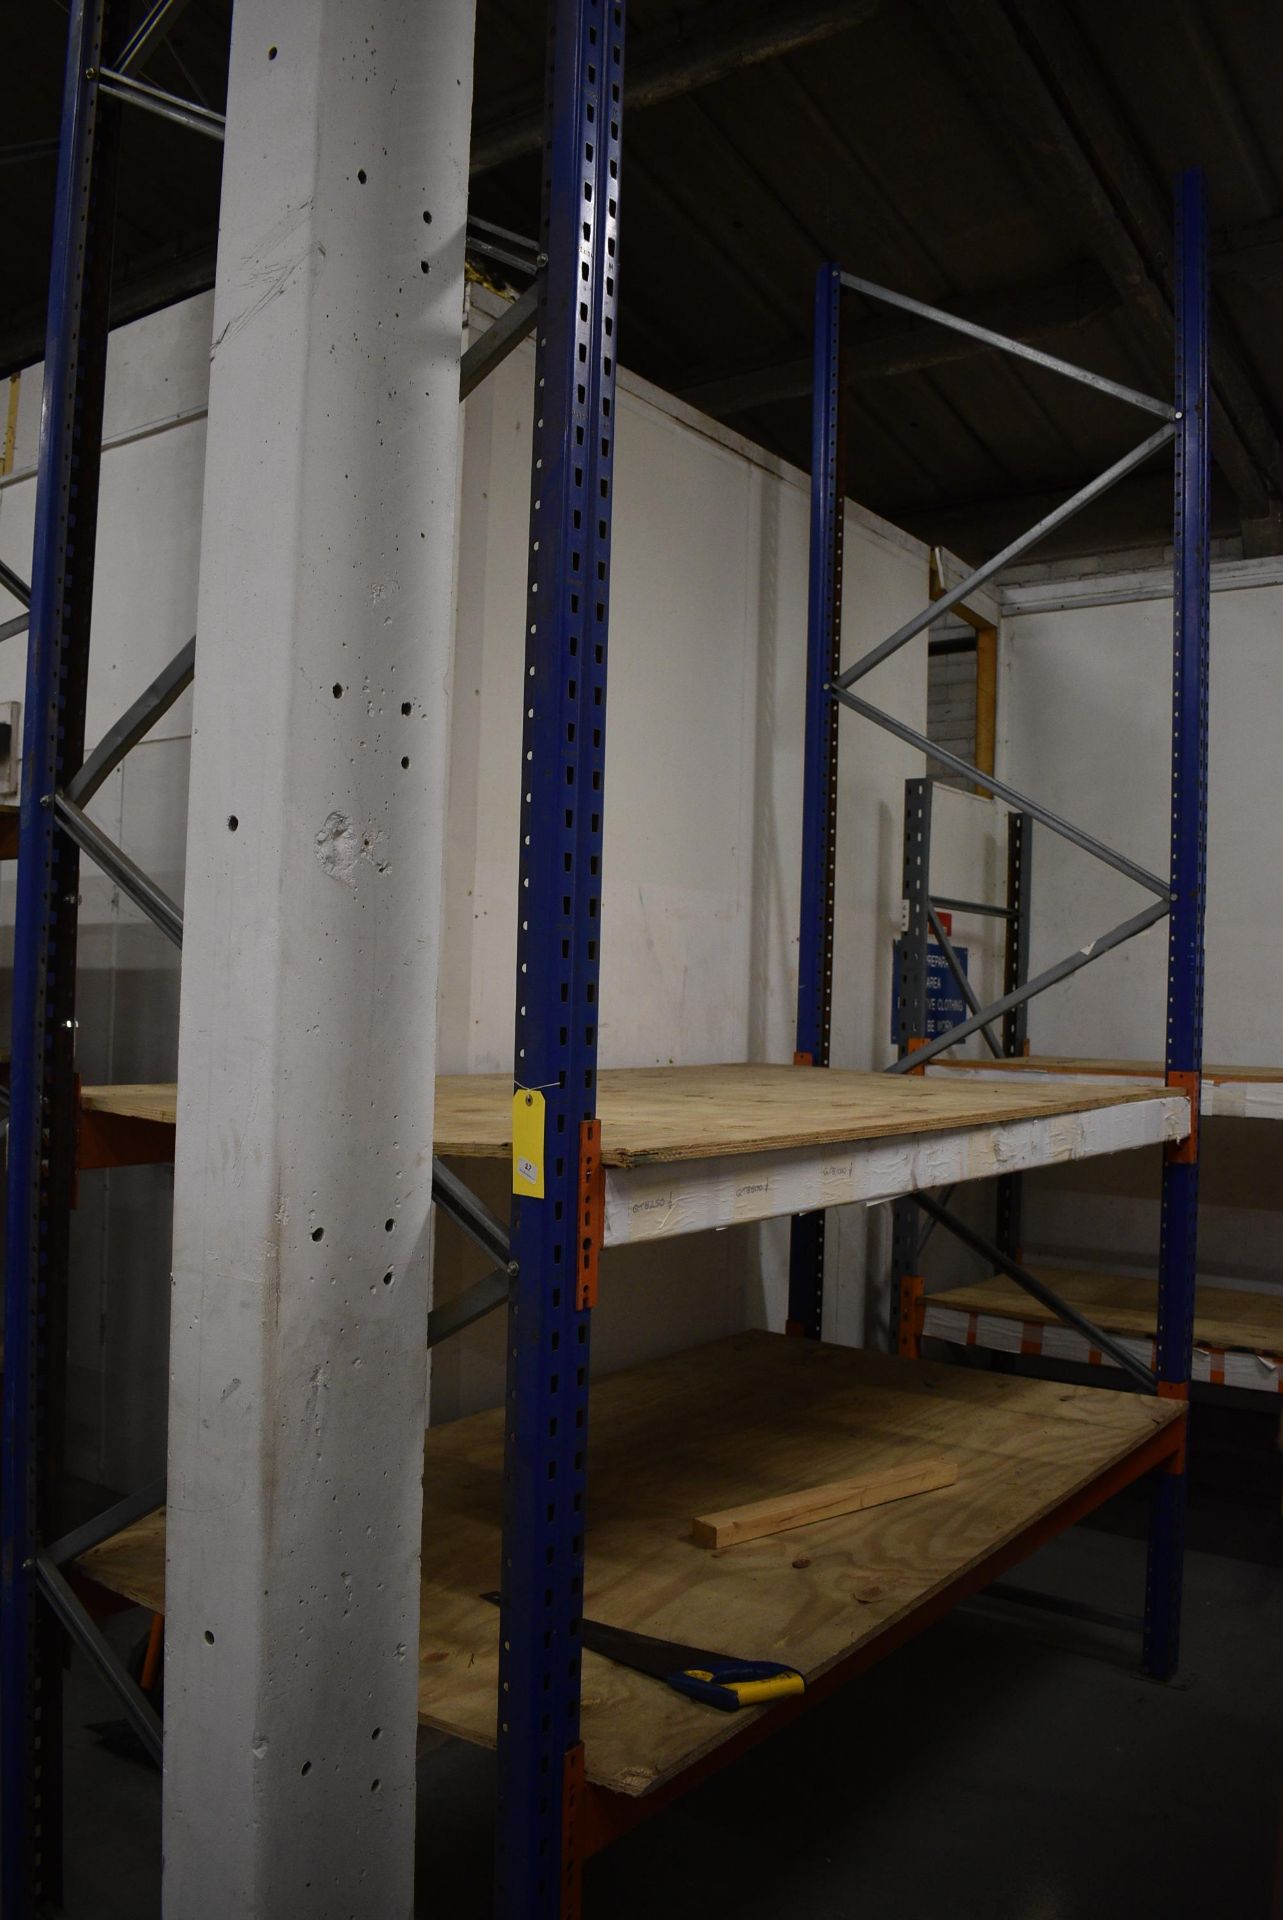 One Bay of Dexion M Racking 110x230cm x 370cm high Comprising Two Uprights and Four Beams (